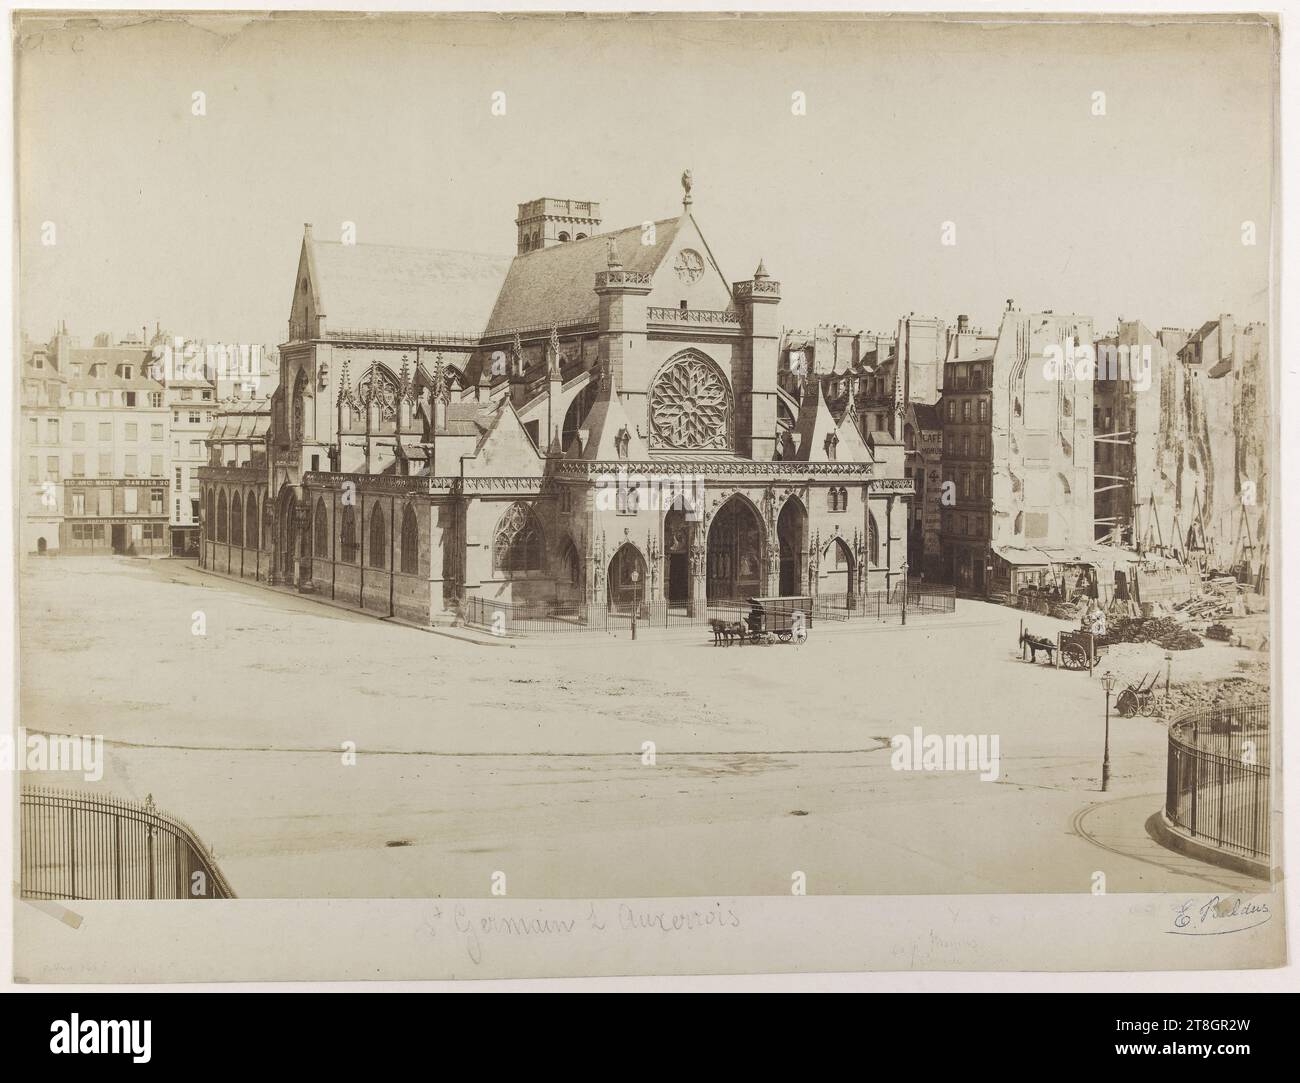 Church of Saint-Germain-l'Auxerrois and the Café Momus (literary cenacle), 1st arrondissement, Paris, Baldus, Edouard, Photographer, Between 1857 and 1862, Photography, Graphic arts, Photography, Salted paper print, Dimensions - Work: Height: 31.5 cm, Width: 44.5 cm, Dimensions - Antique mount:, Height: 34.5 cm, Width: 45.2 cm Stock Photo